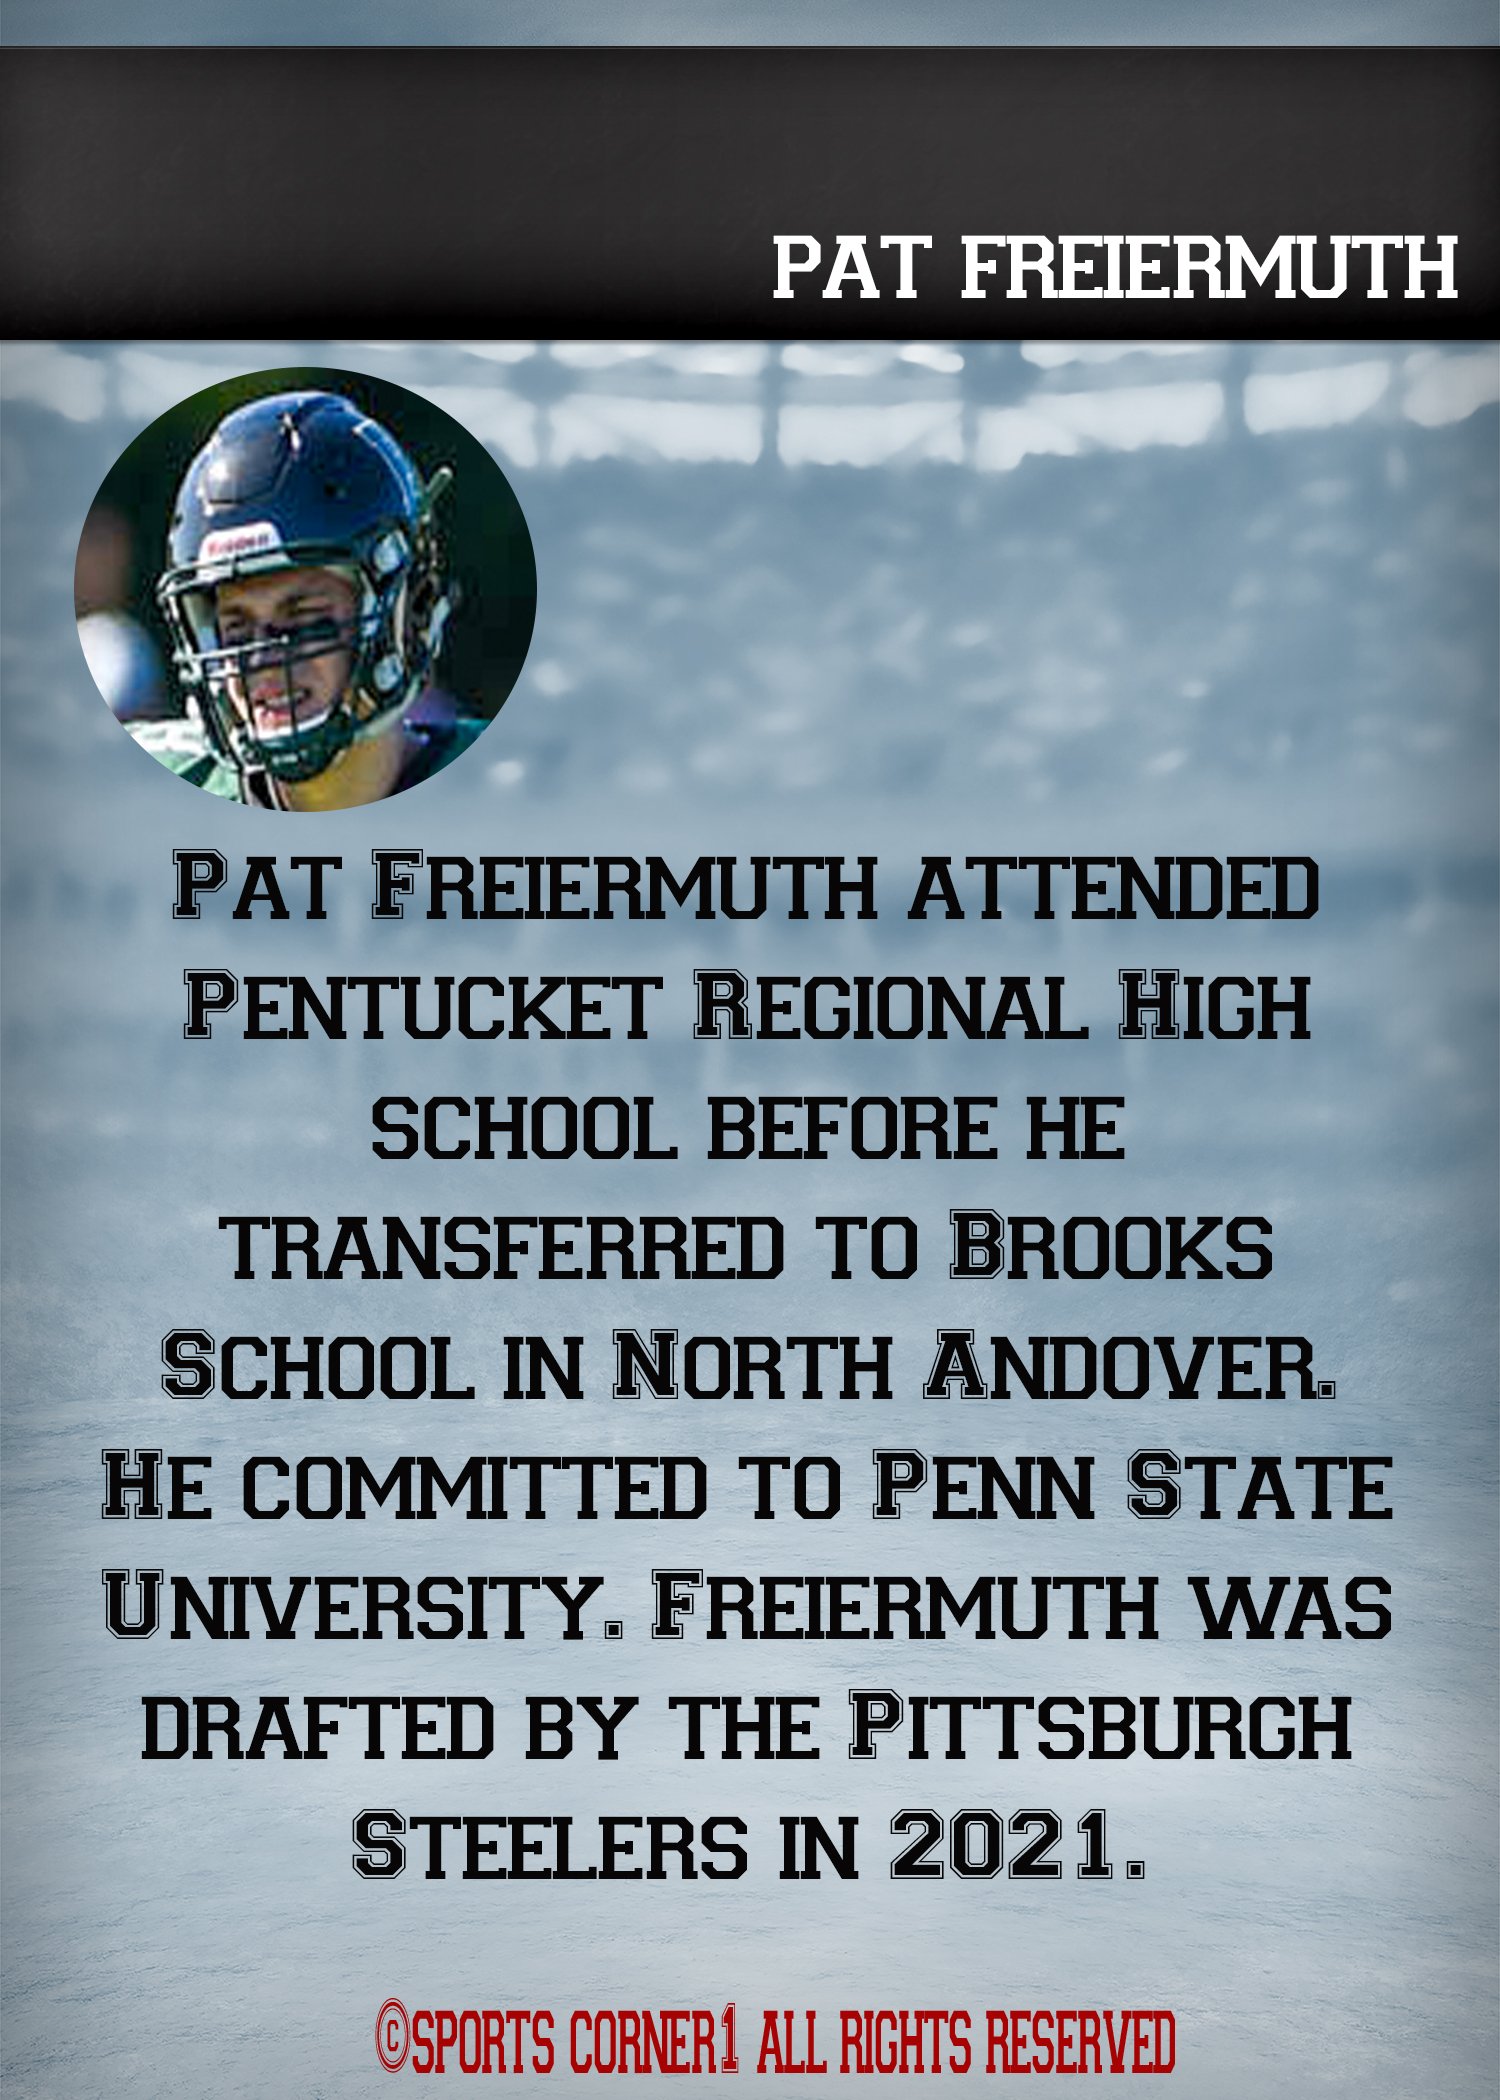 Pat Freiermuth © Sports Corner 1 All rights reserved